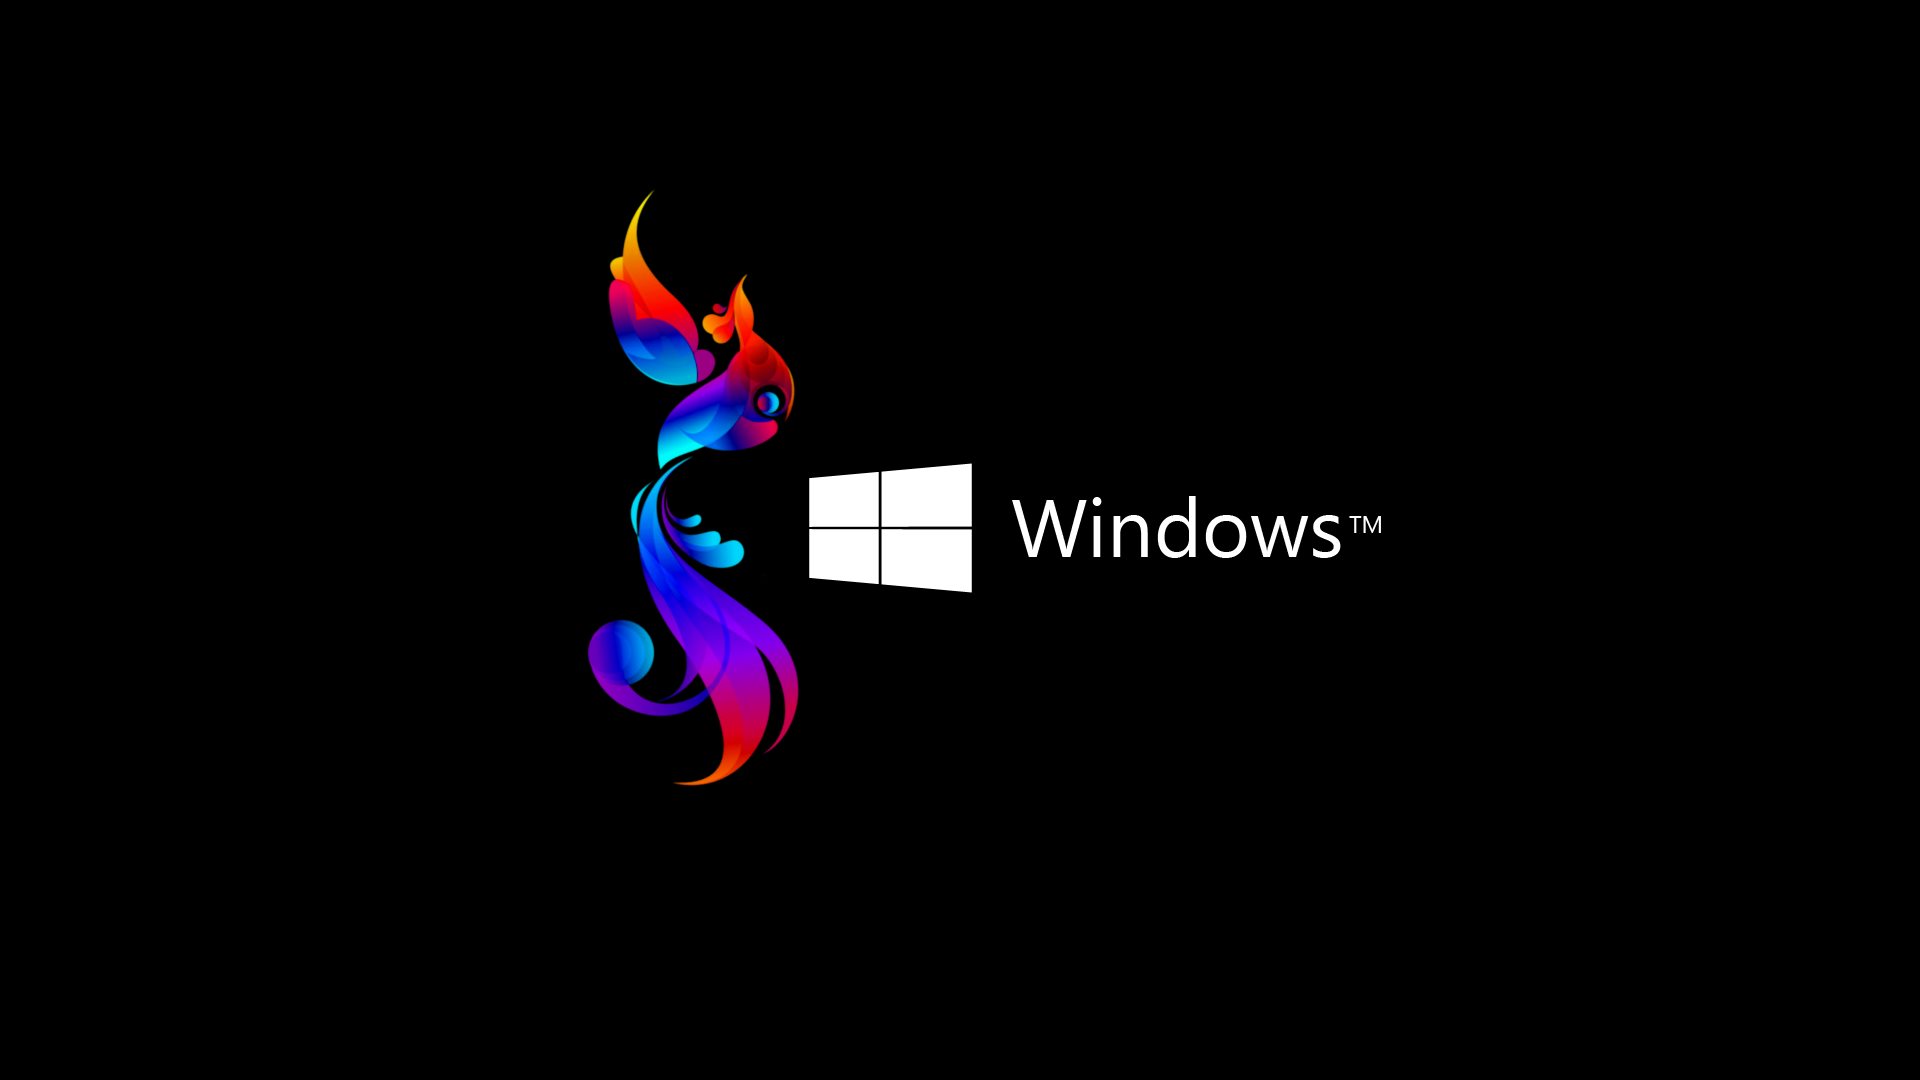 windows, technology, windows 8 cell phone wallpapers